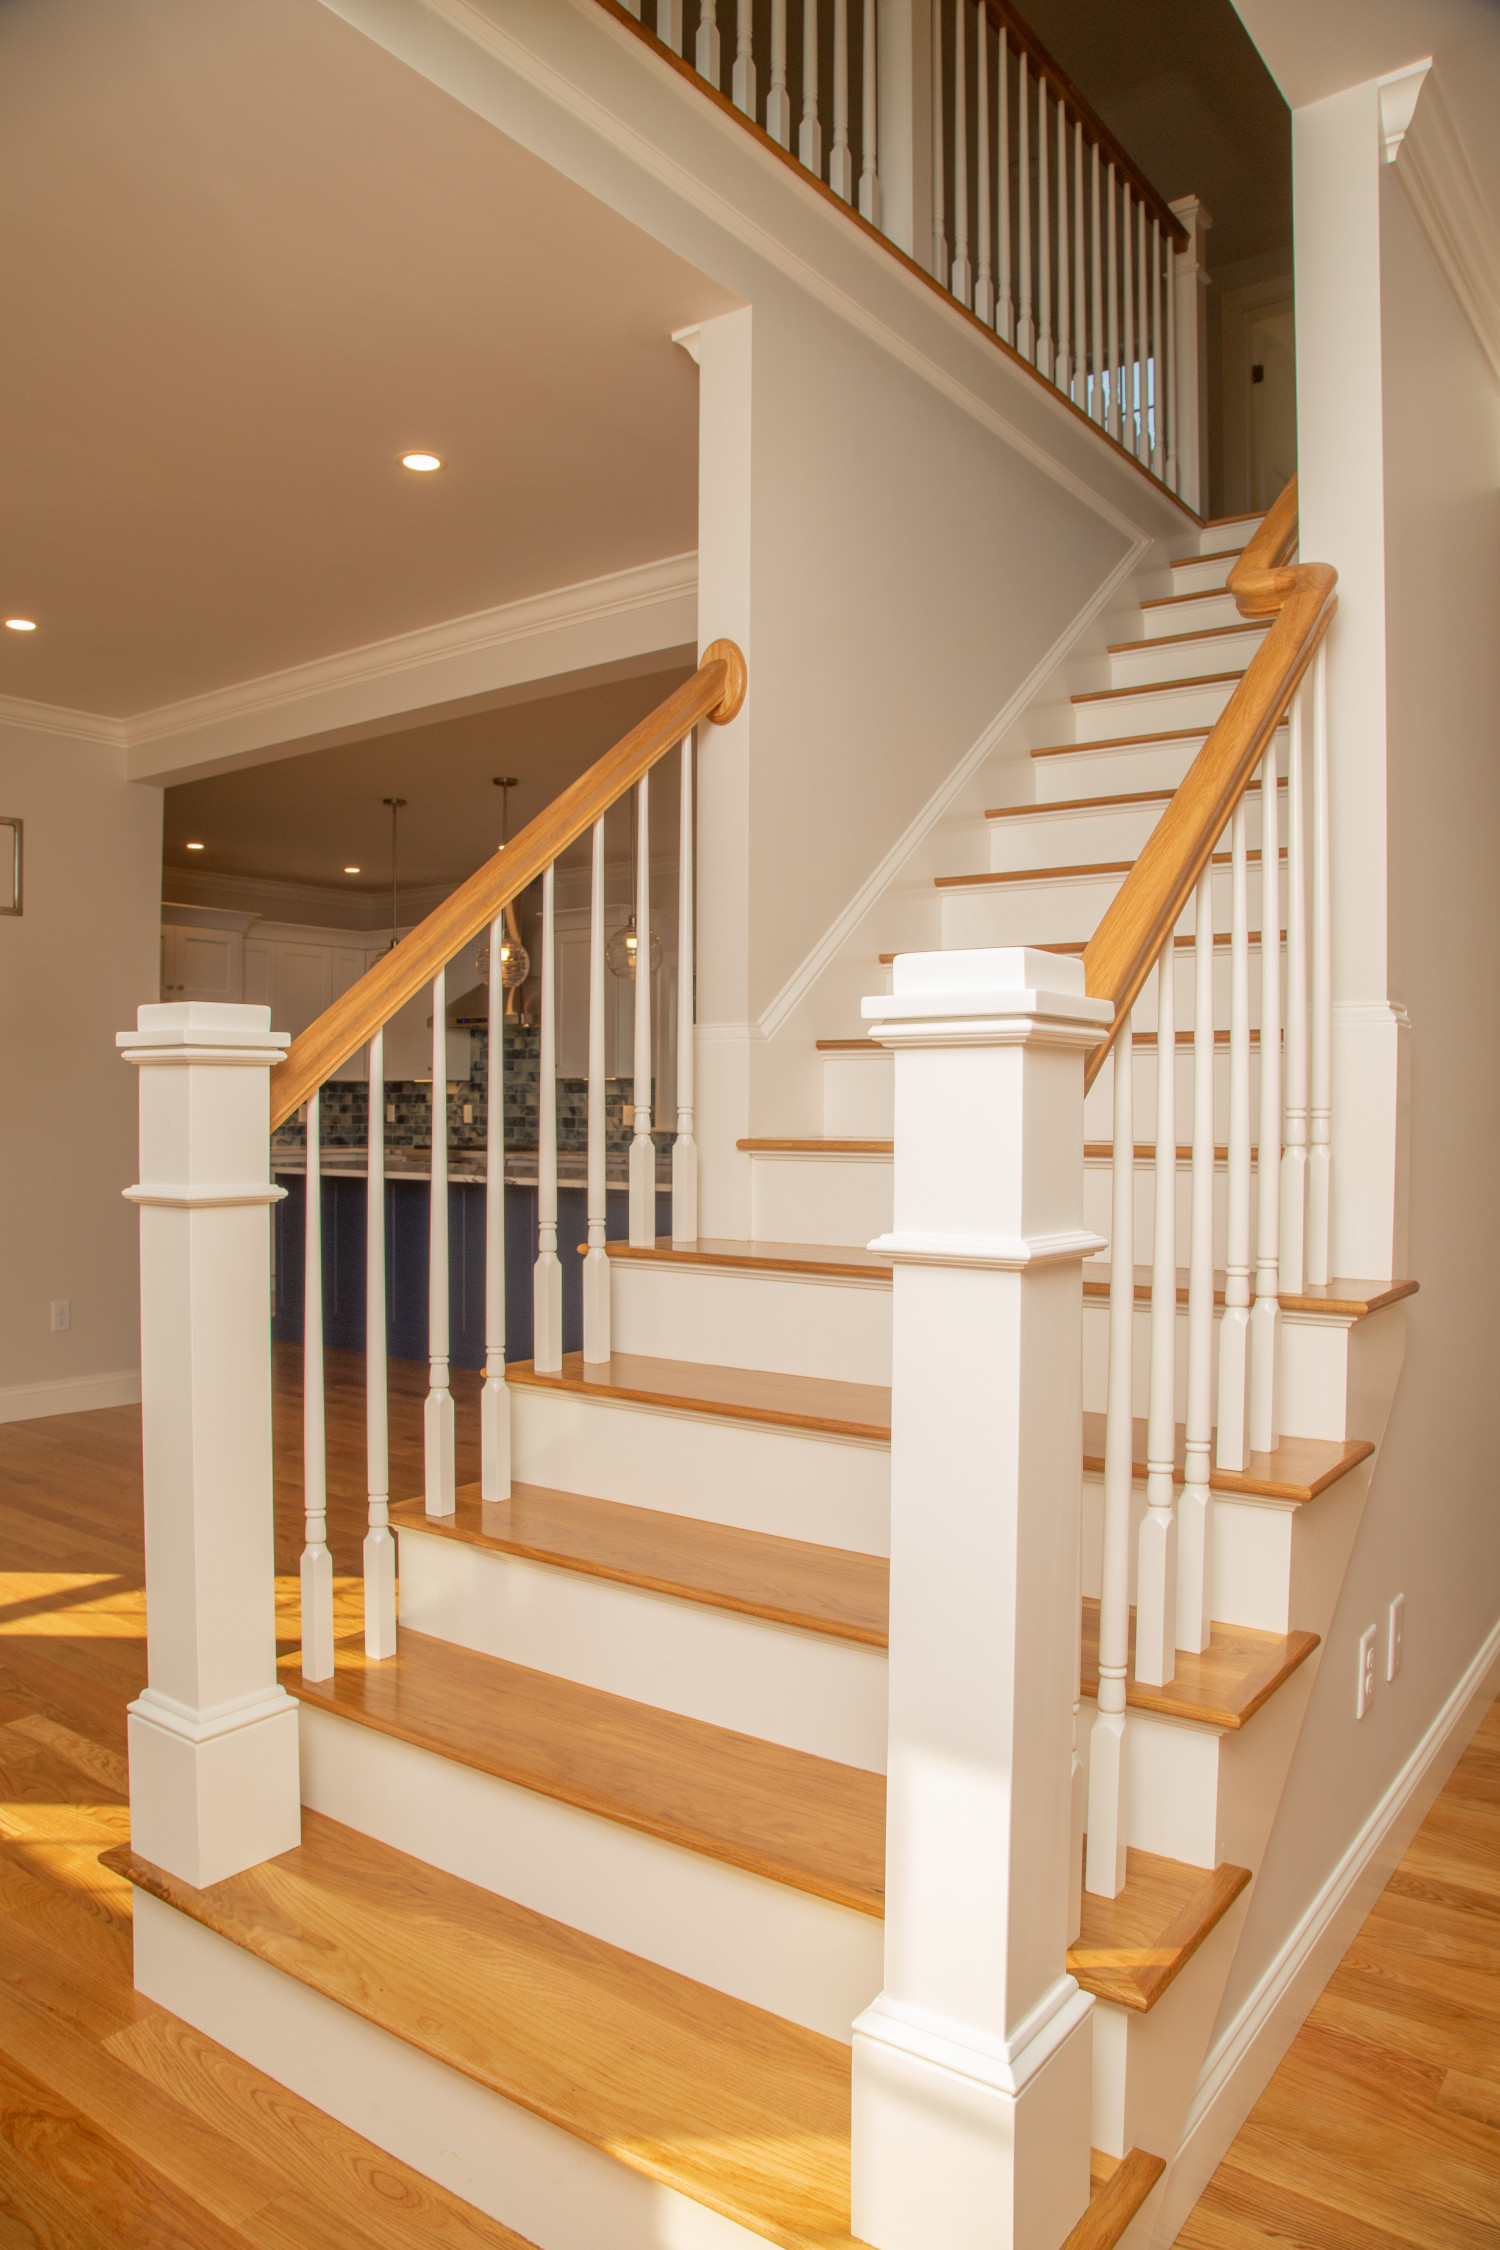 Wooden staircase in new home